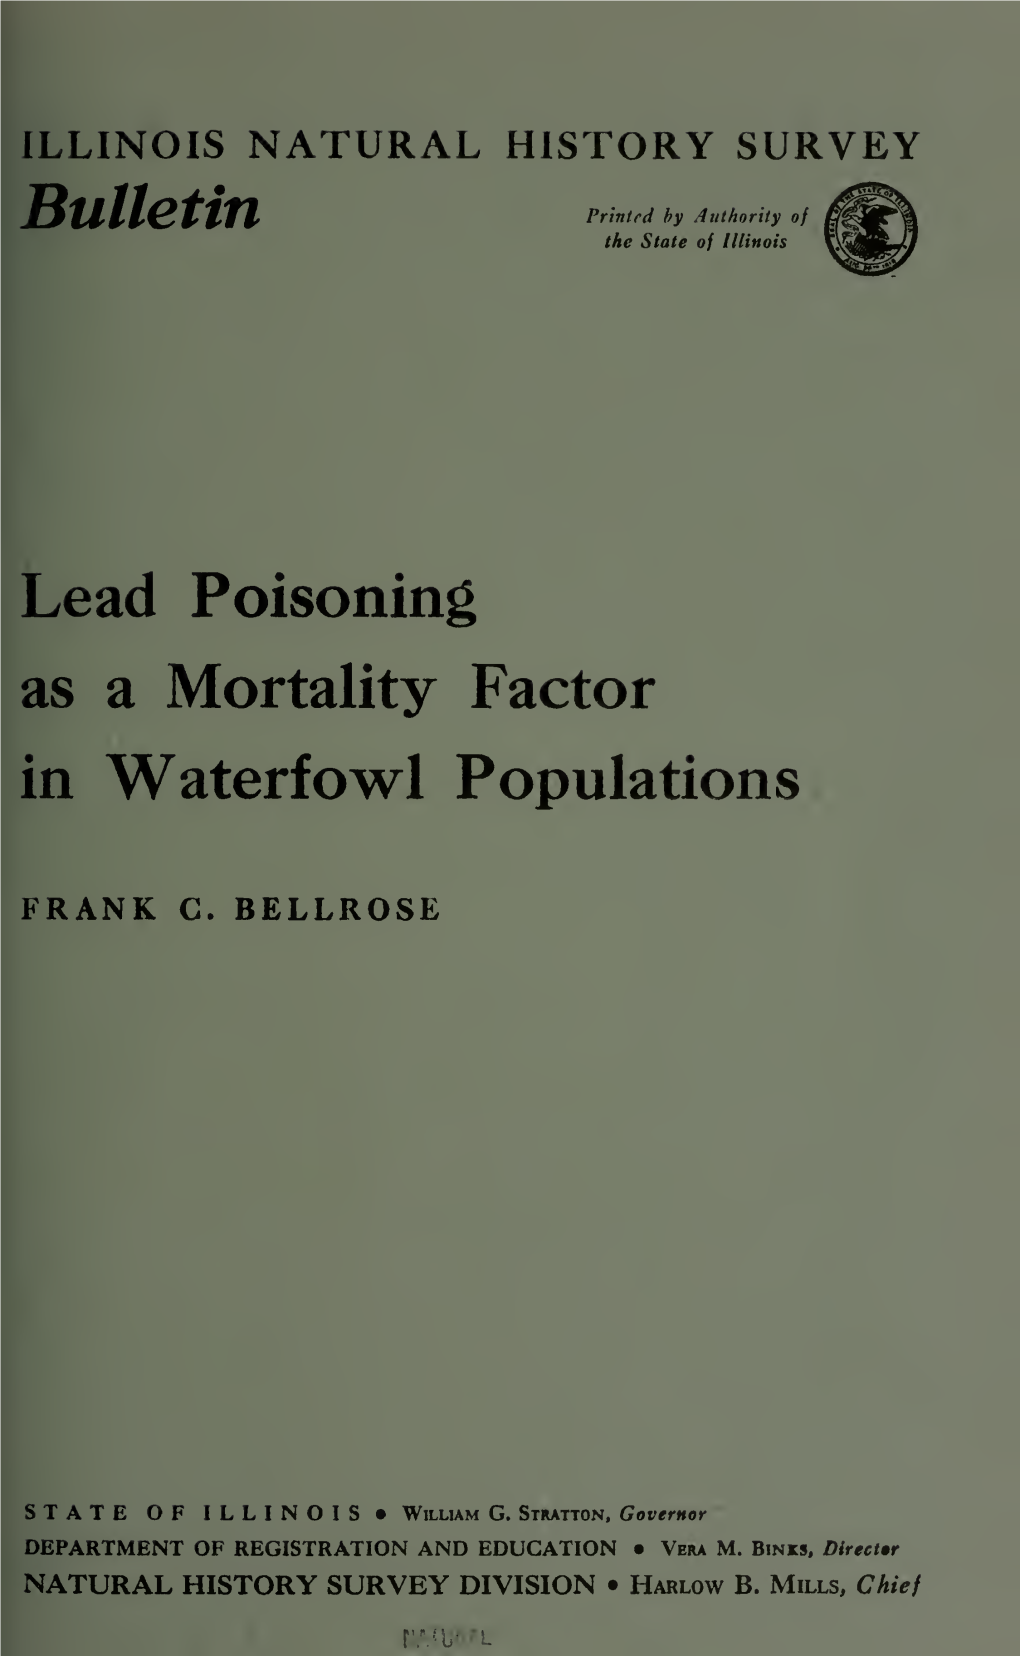 Lead Poisoning As a Mortality Factor in Waterfowl Populations